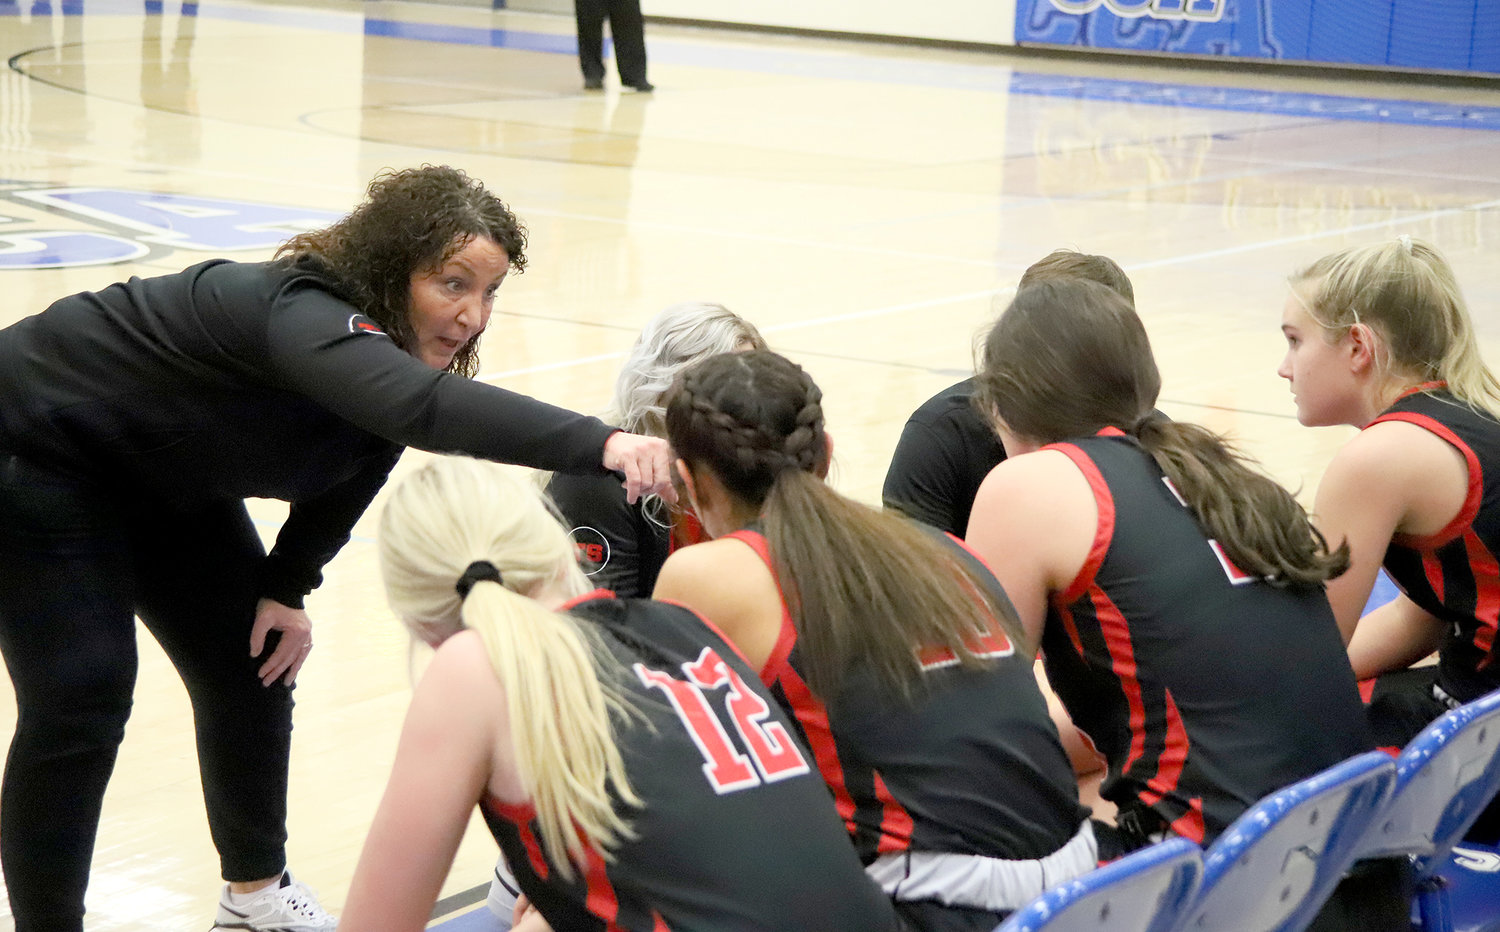 Fort Madison Head Coach TJ Sargent tries to get the Lady Hounds motivated during a timeout in the 2nd half of Fort Madison's regional semifinal loss Saturday in Tiffin